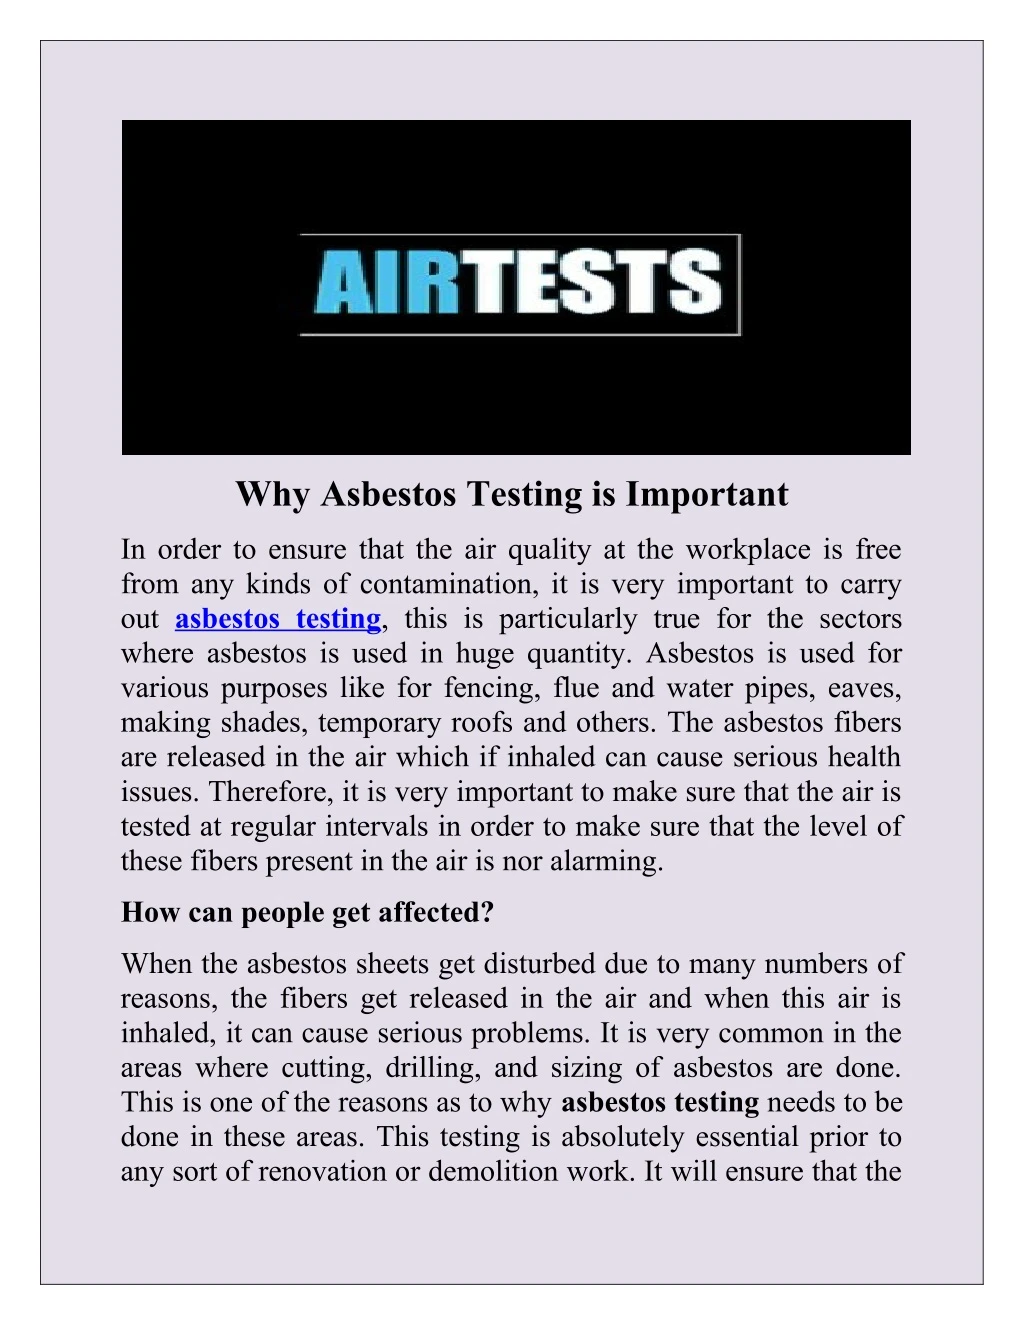 why asbestos testing is important